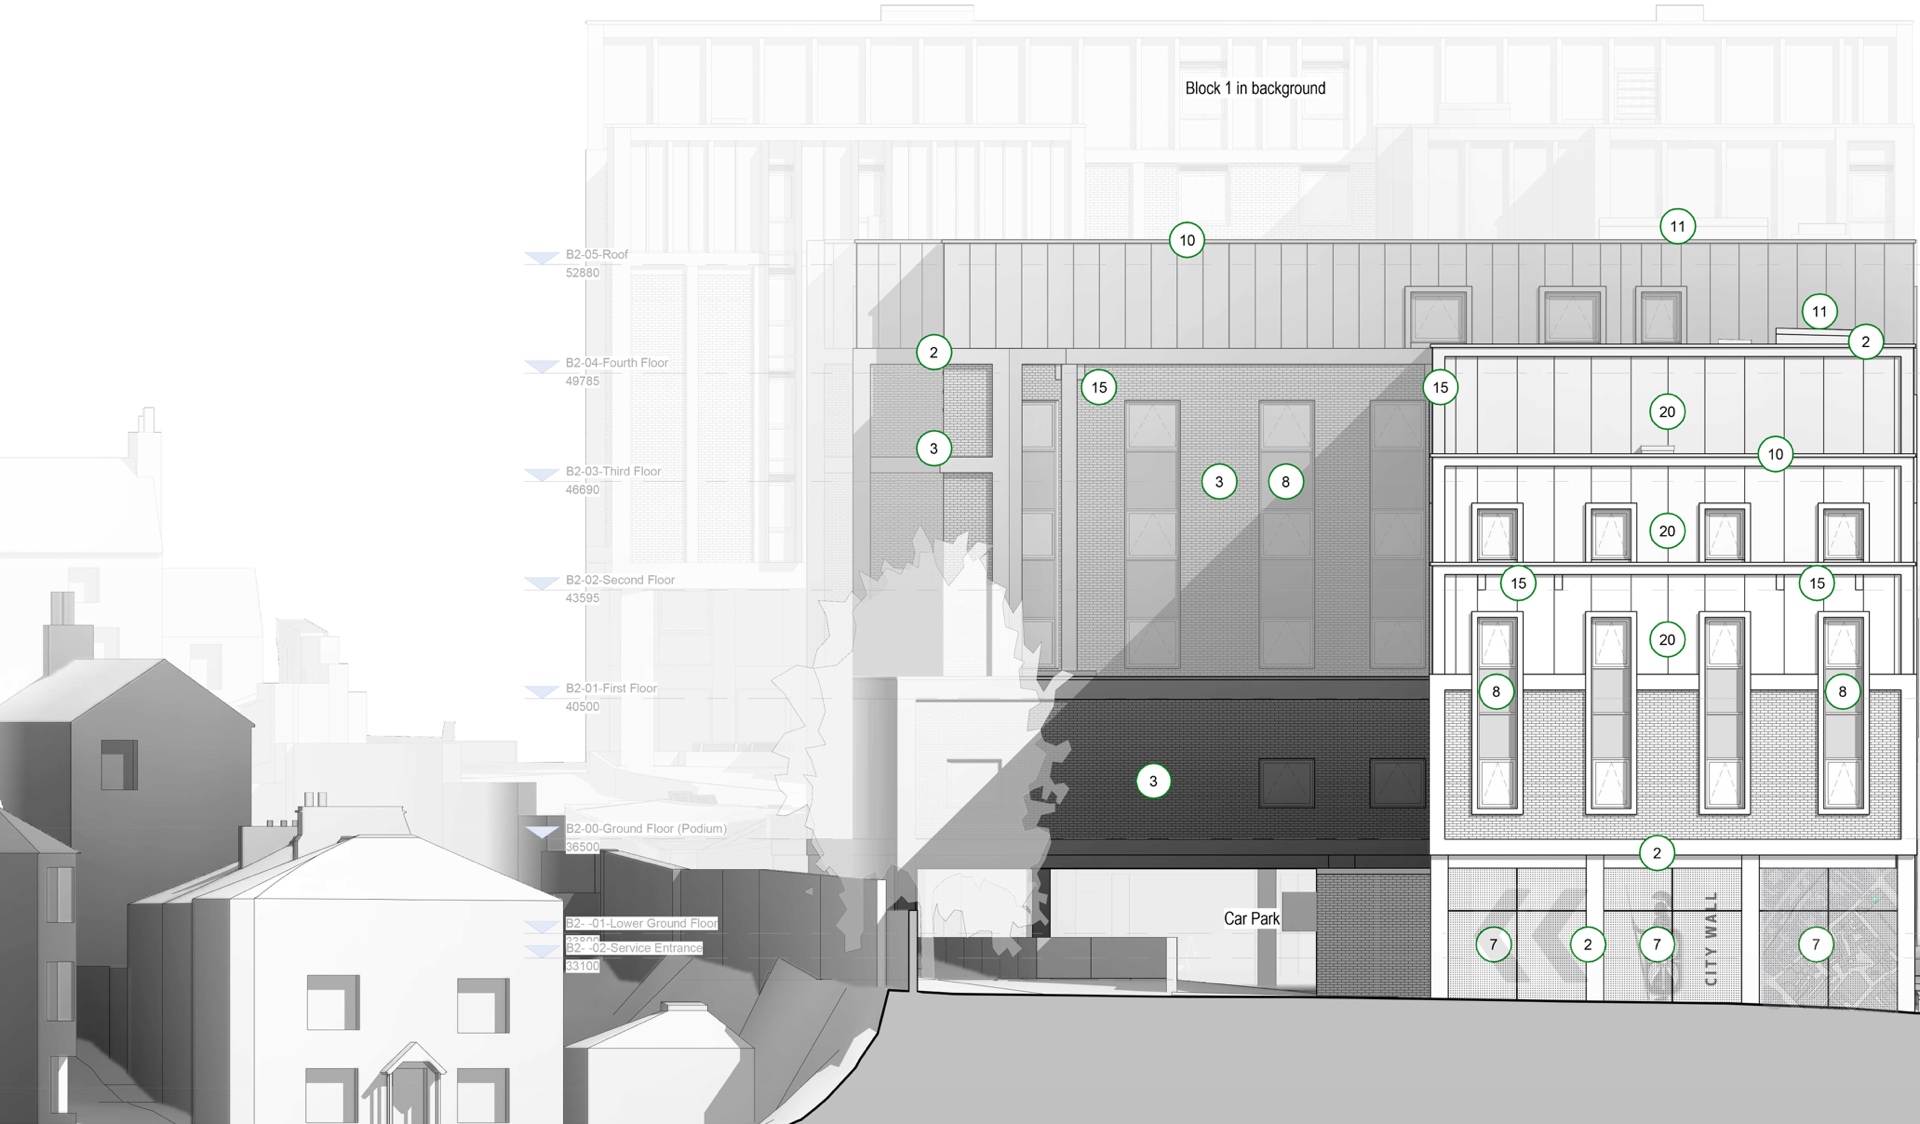 Harlequins co-living and hotel block elevations compared with Northernhay Street housing